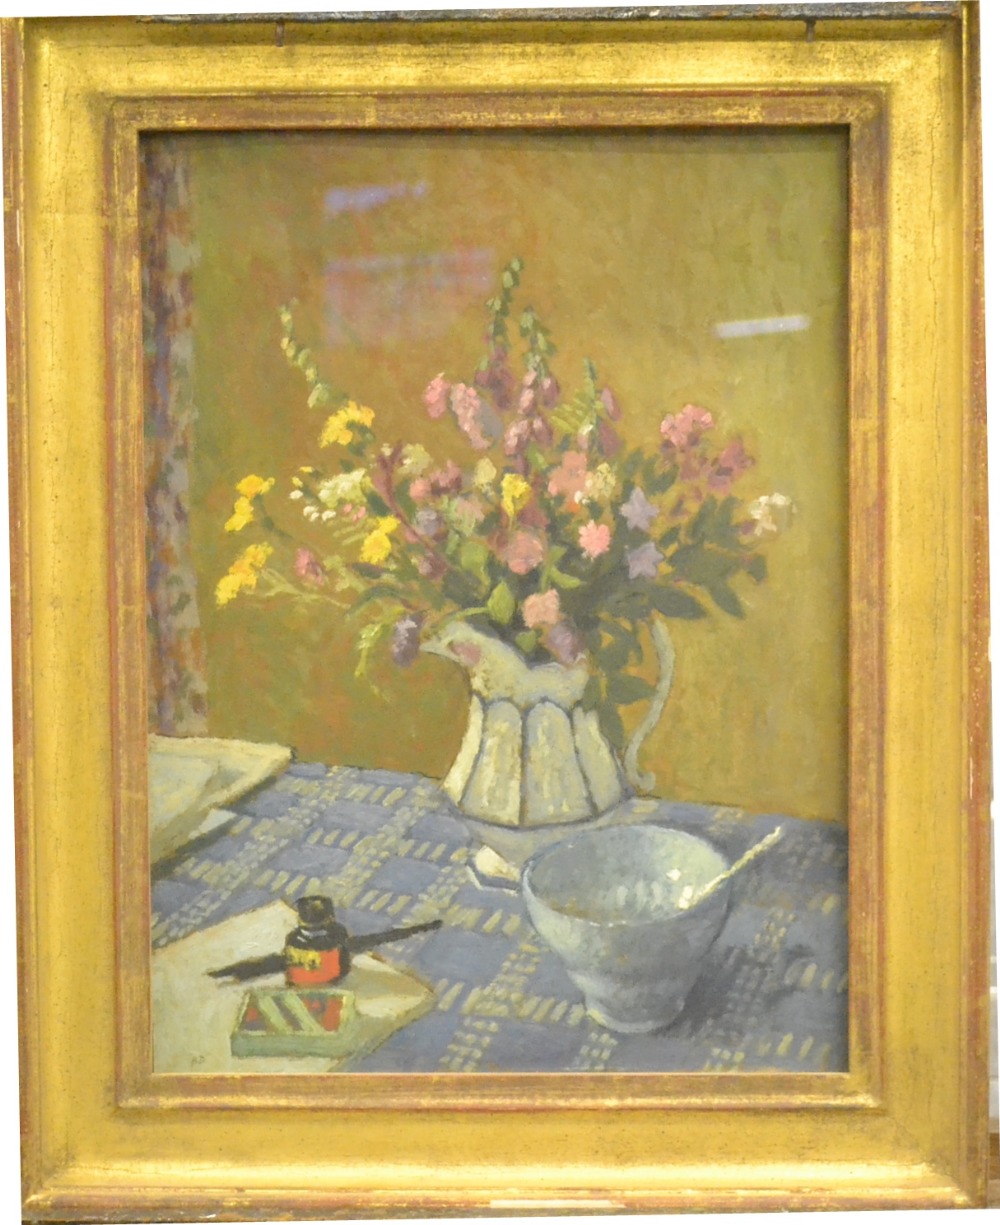 Bernard Dunstan RA, PPRWA (b.1920) 
Still life of summer flowers in a jug with a bowl, fountain - Image 2 of 2